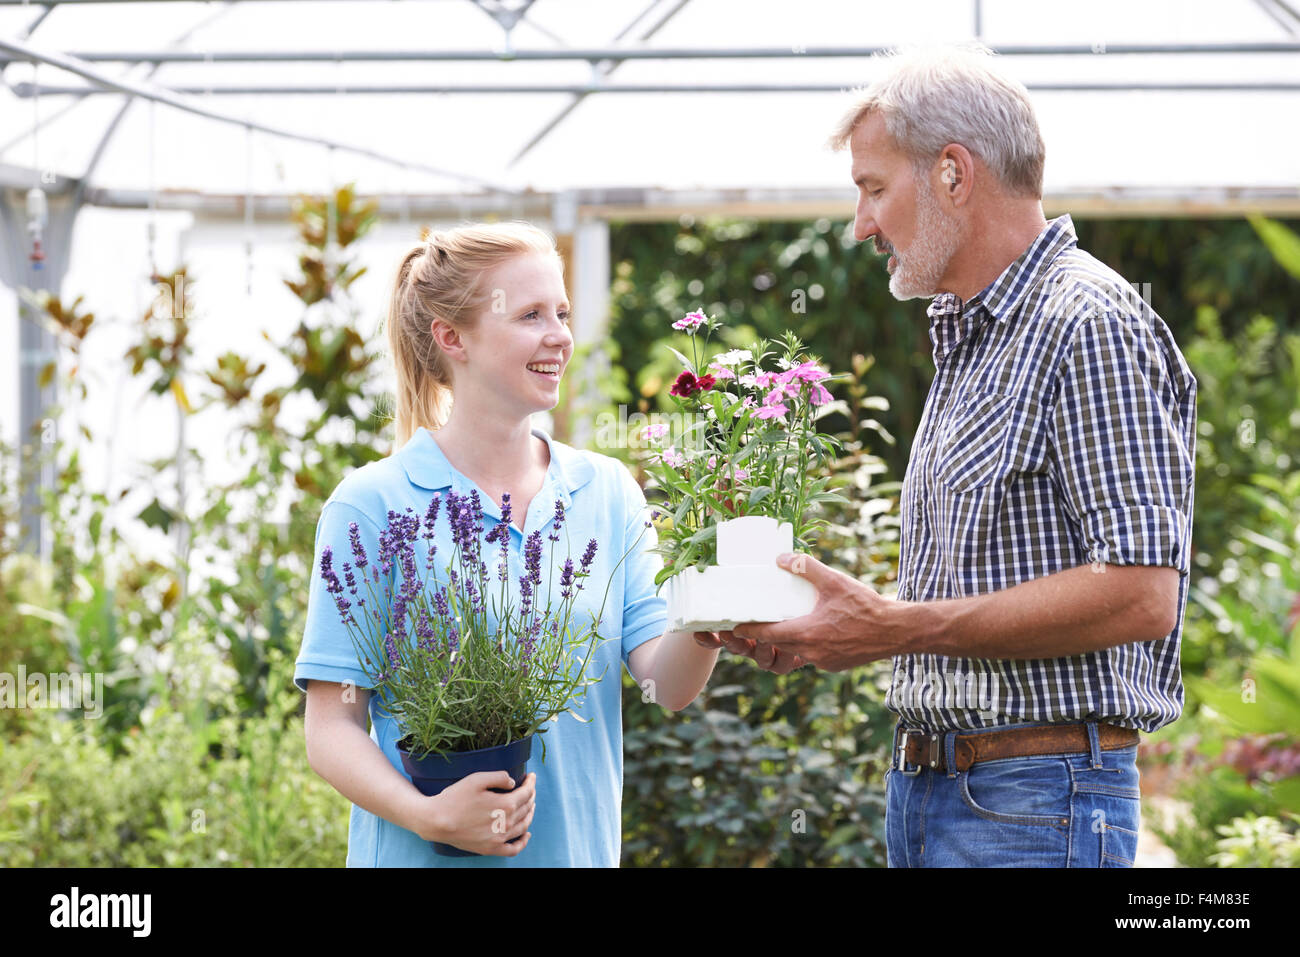 Male Customer Asking Staff For Plant Advice At Garden Center Stock Photo